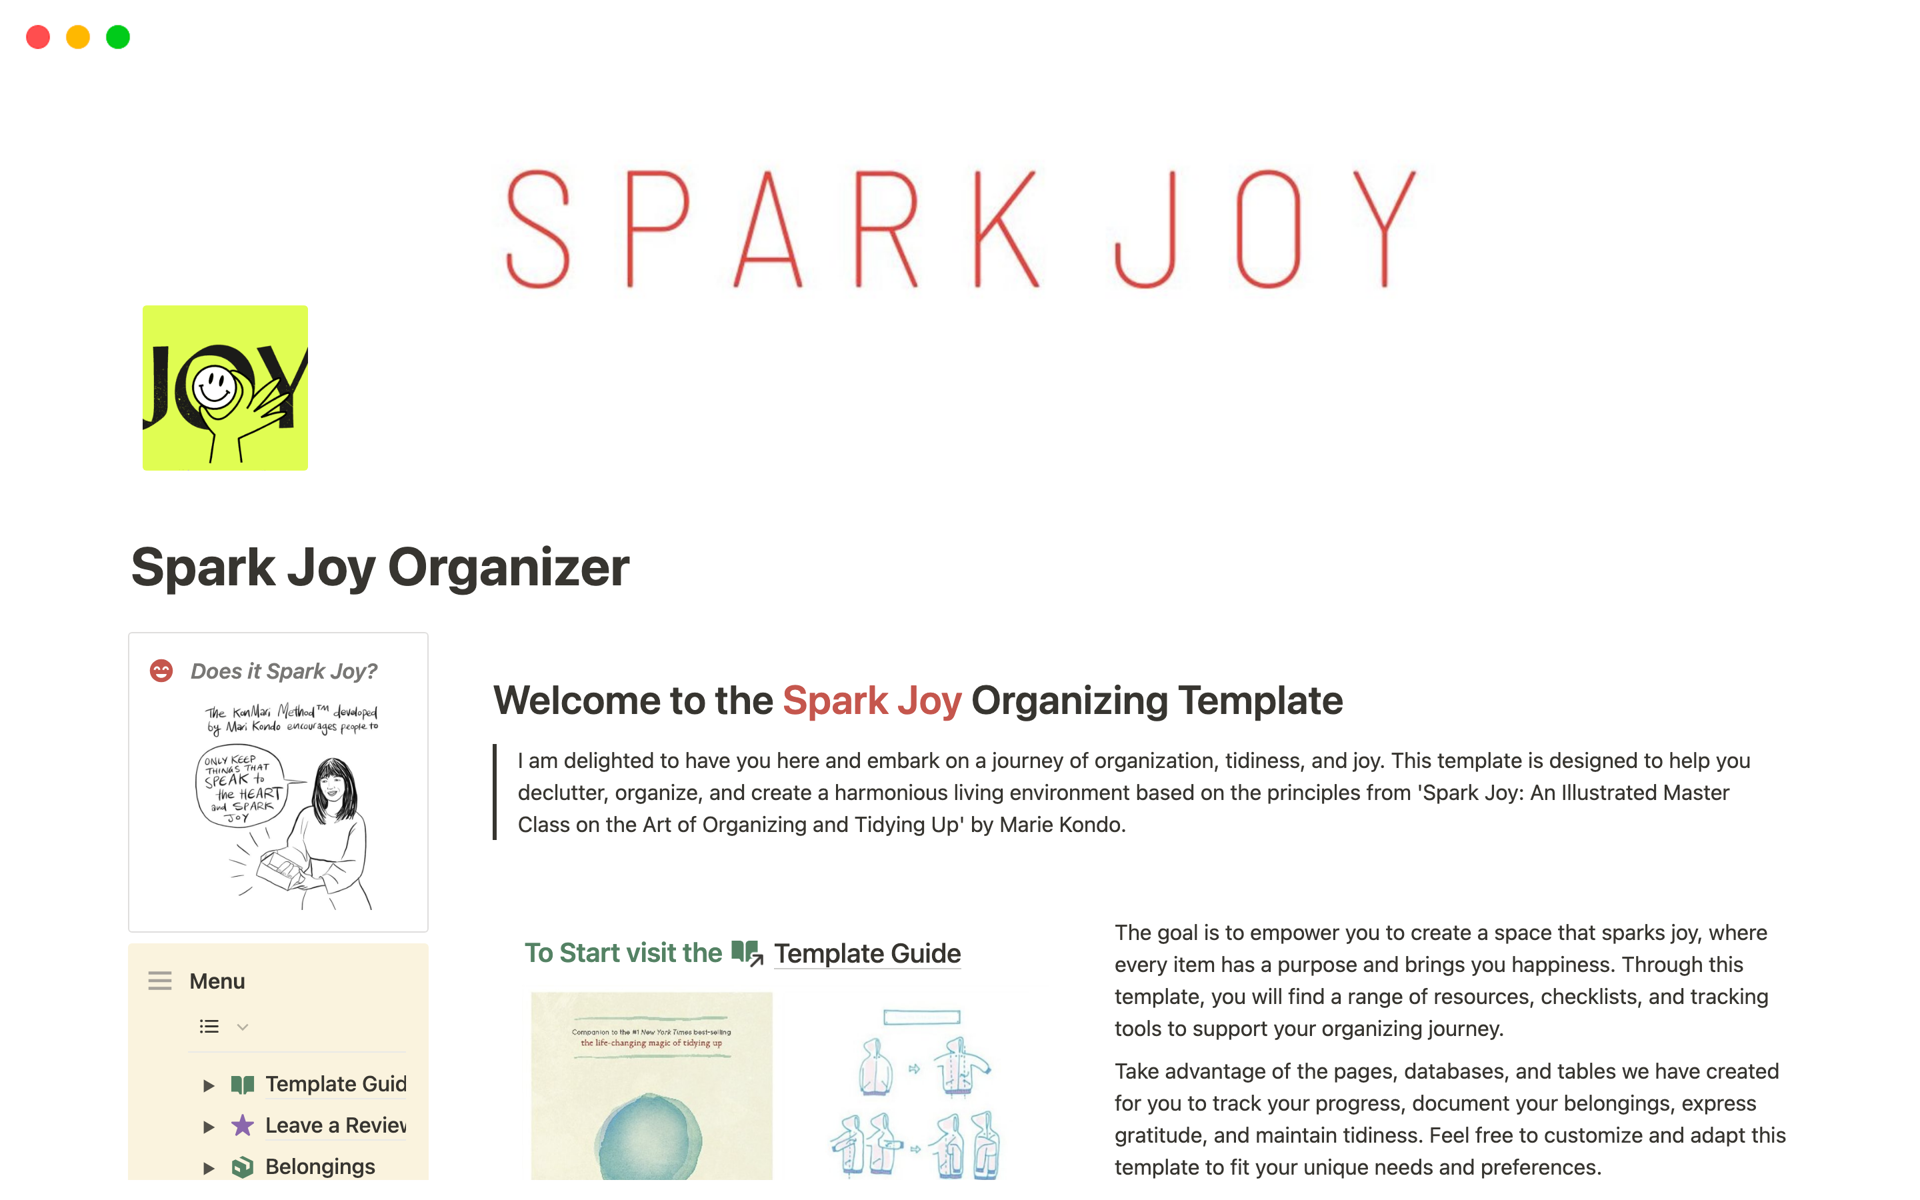 The Notion Spark Joy Organizing Template is a comprehensive resource inspired by Marie Kondo's principles, offering a complete solution for achieving a harmonious living environment through decluttering and organizing.